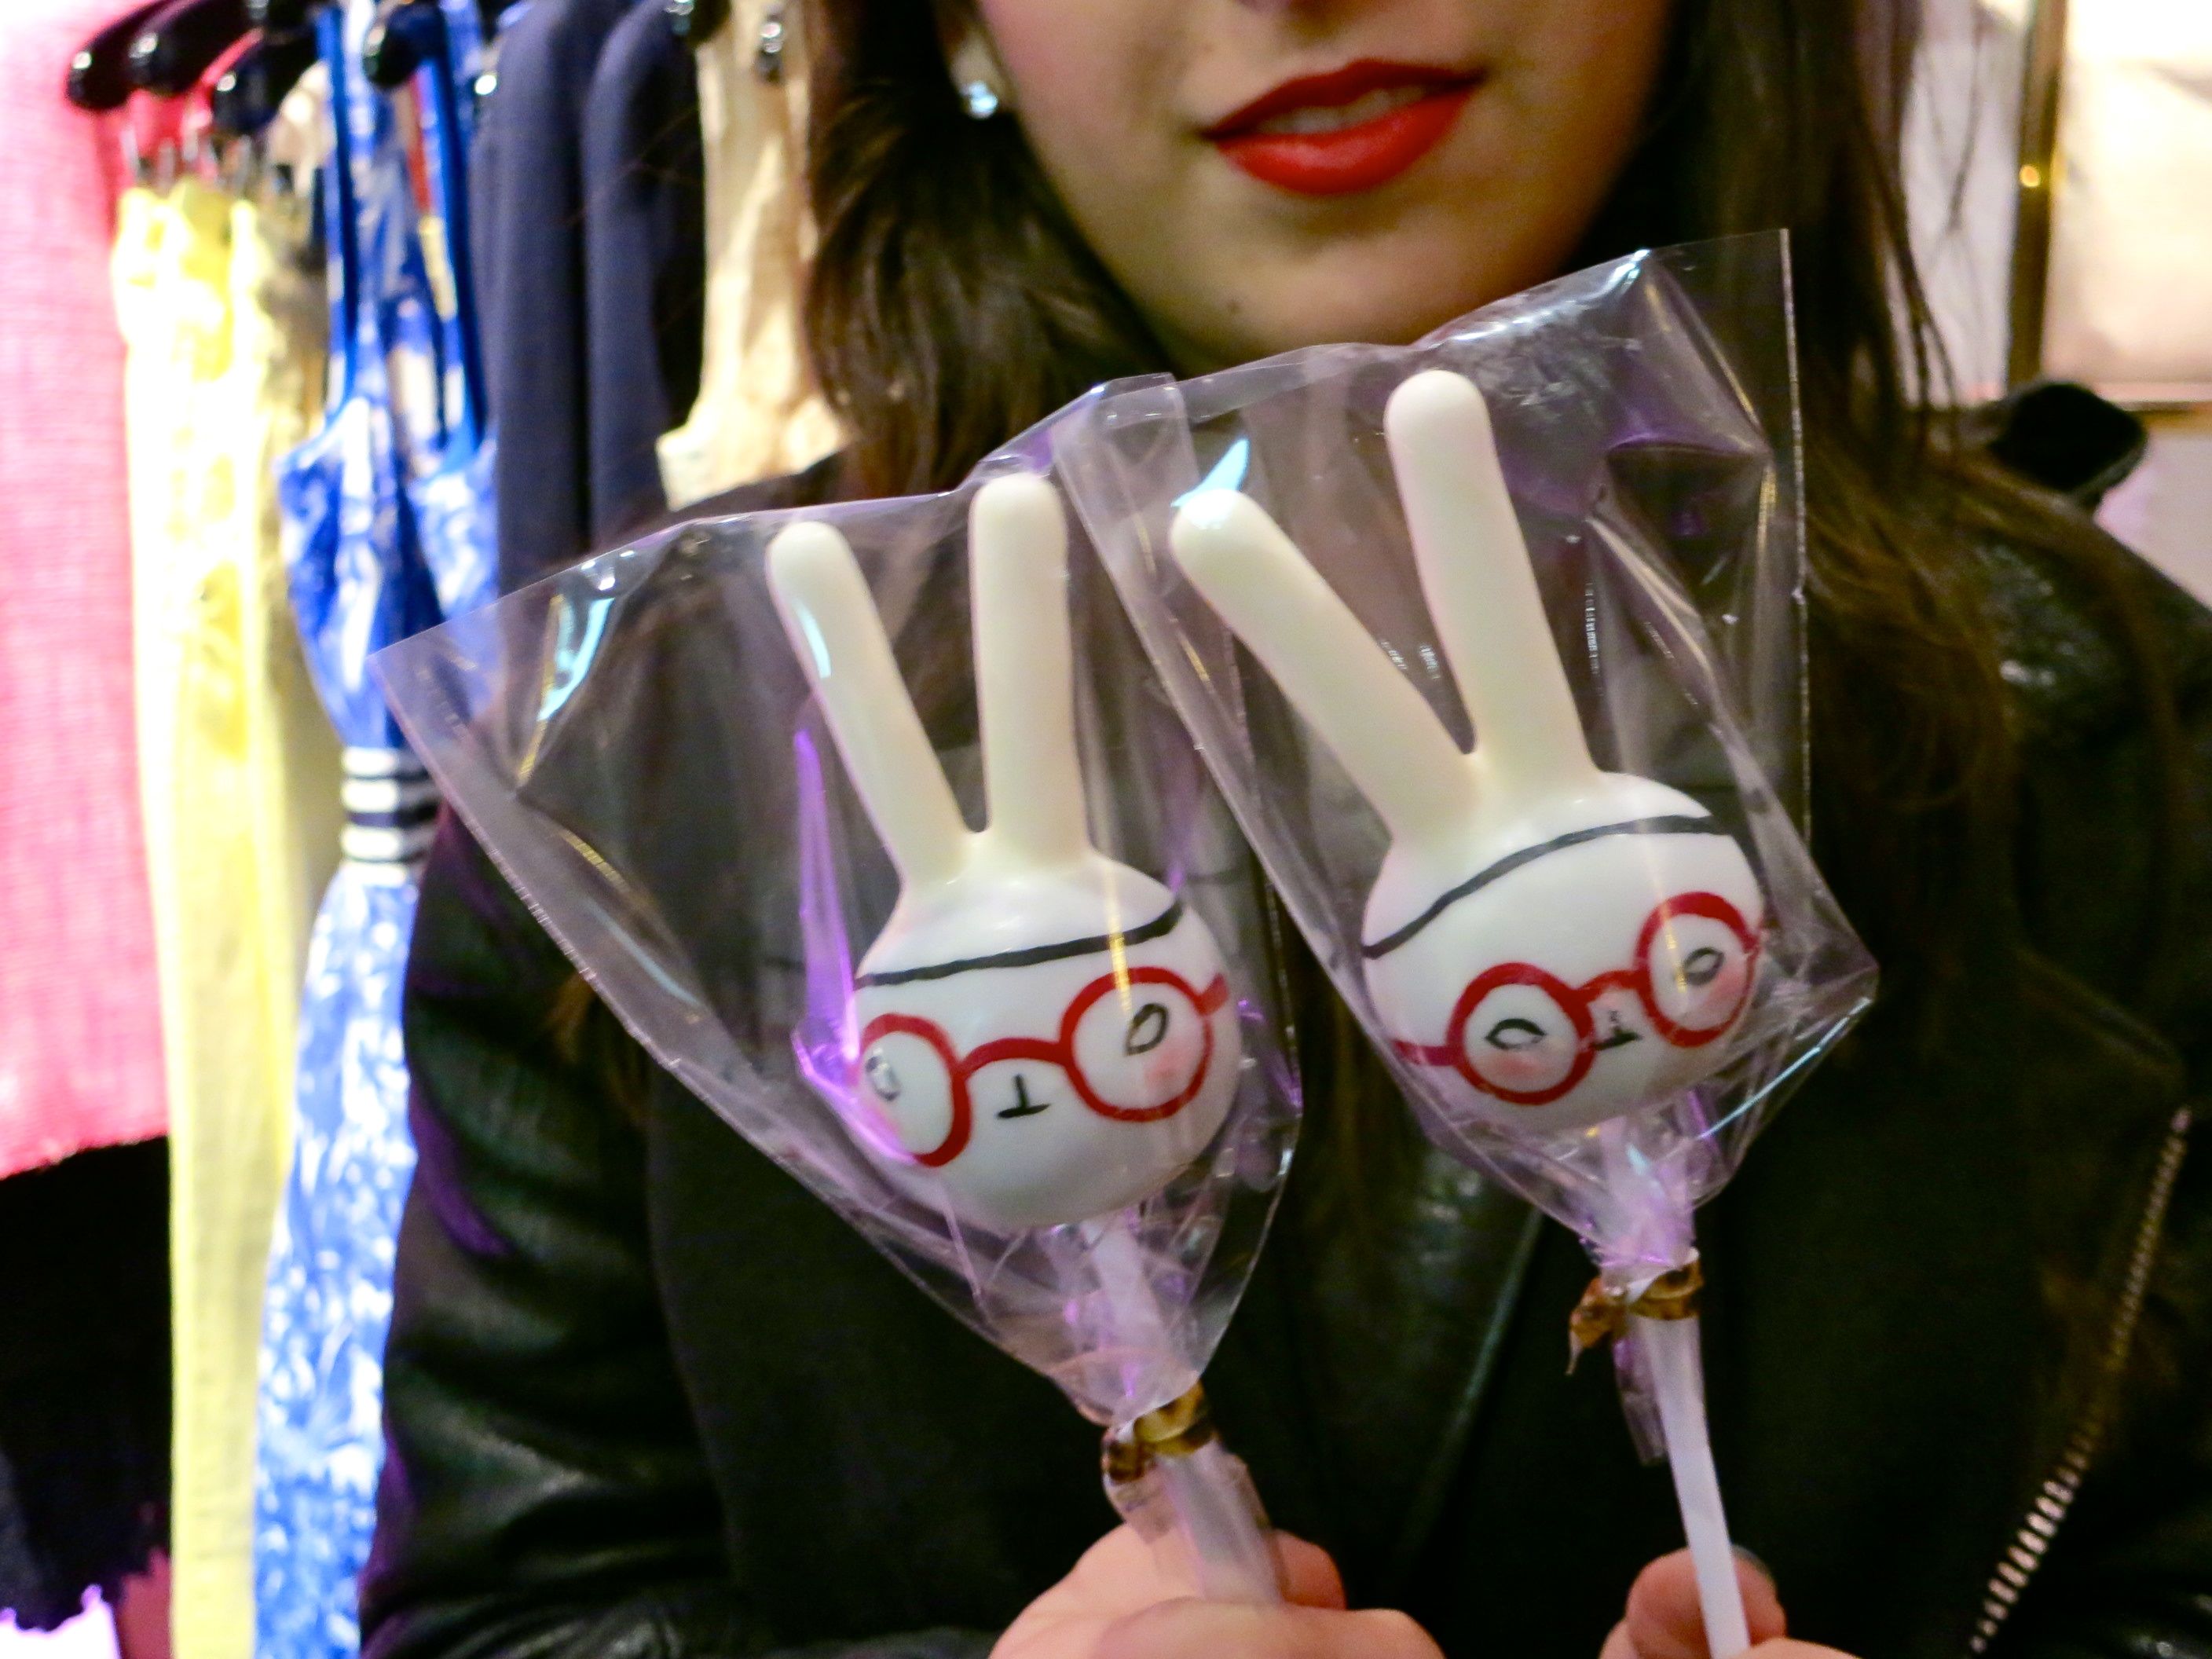 Myfashdiary attends... Juicy Couture's Fifi Lapin Masquerade Ball!